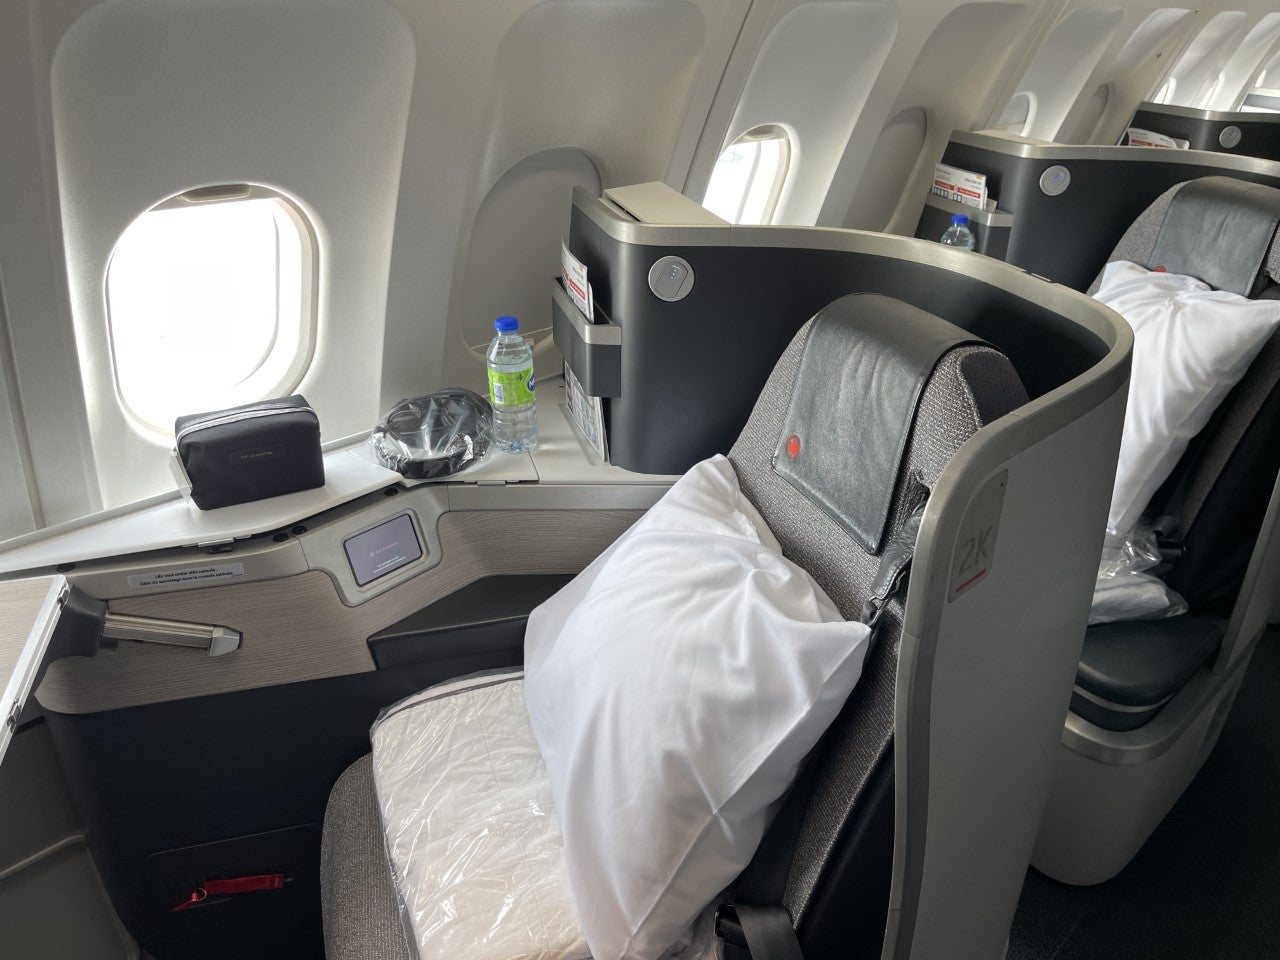 Act now: Book lie-flat business class at premium economy prices with this  Avianca LifeMiles sale - The Points Guy